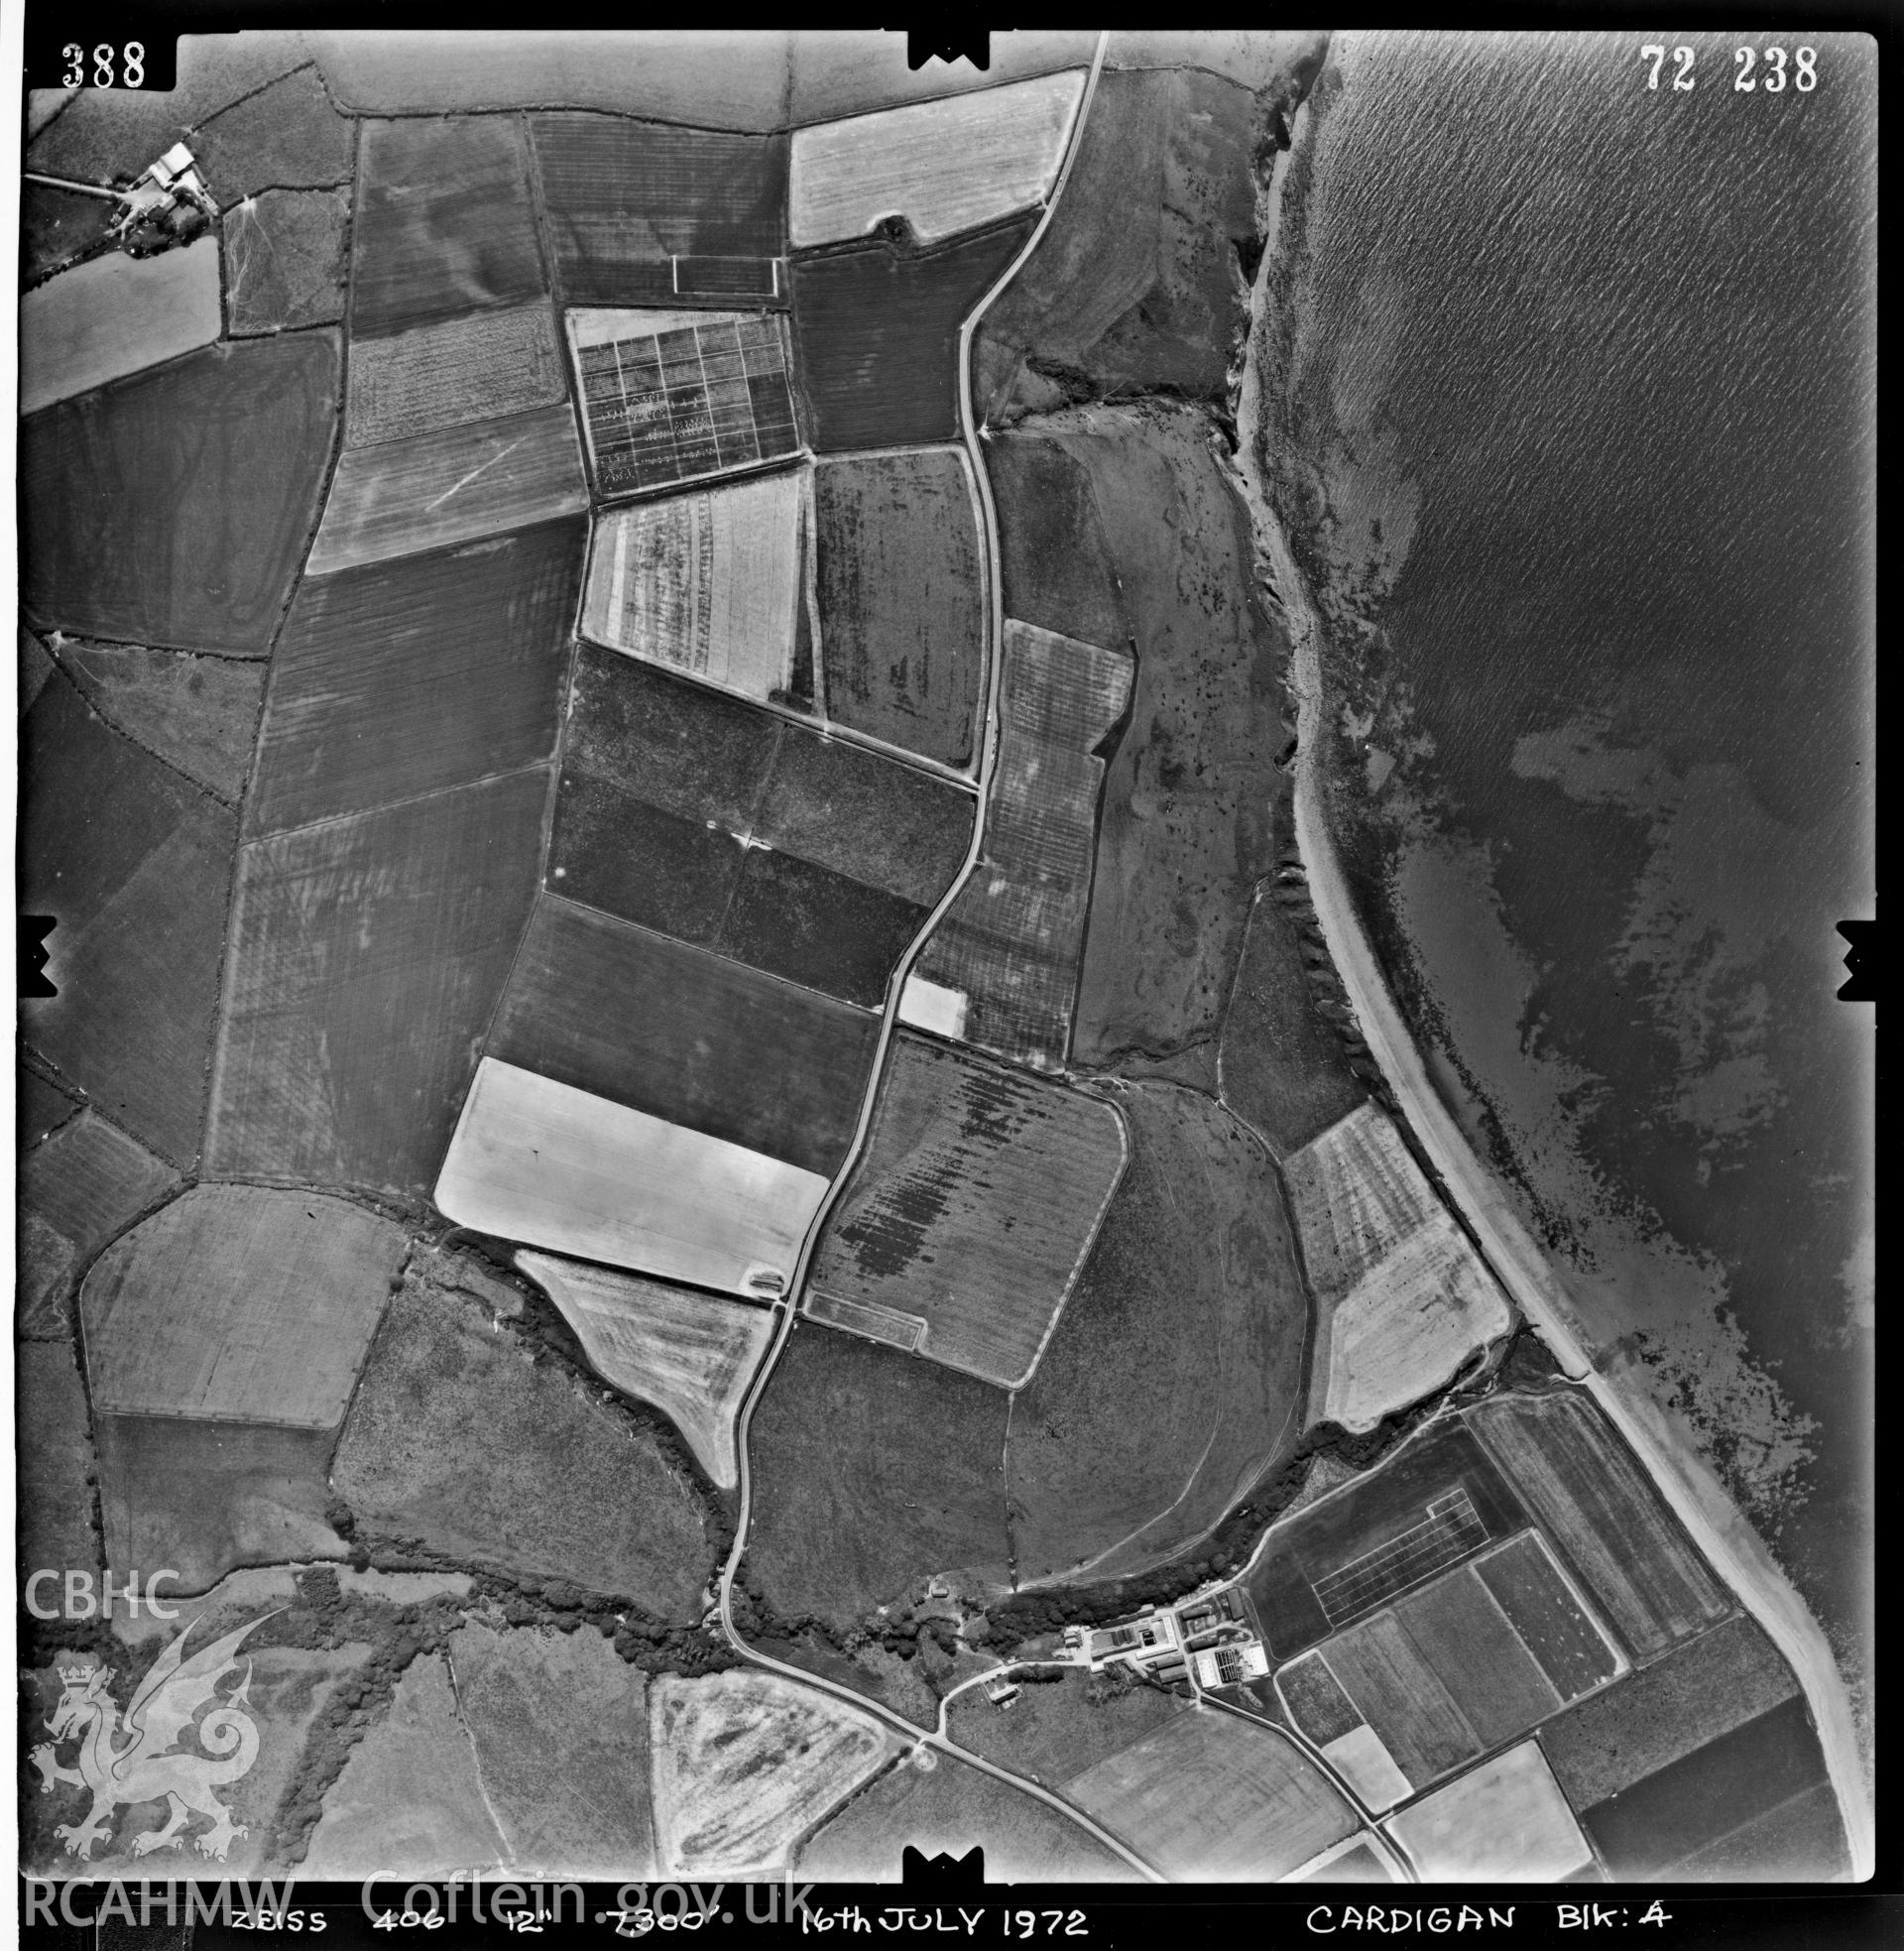 Digitized copy of an aerial photograph showing Aberaeron area, taken by Ordnance Survey, 1972.